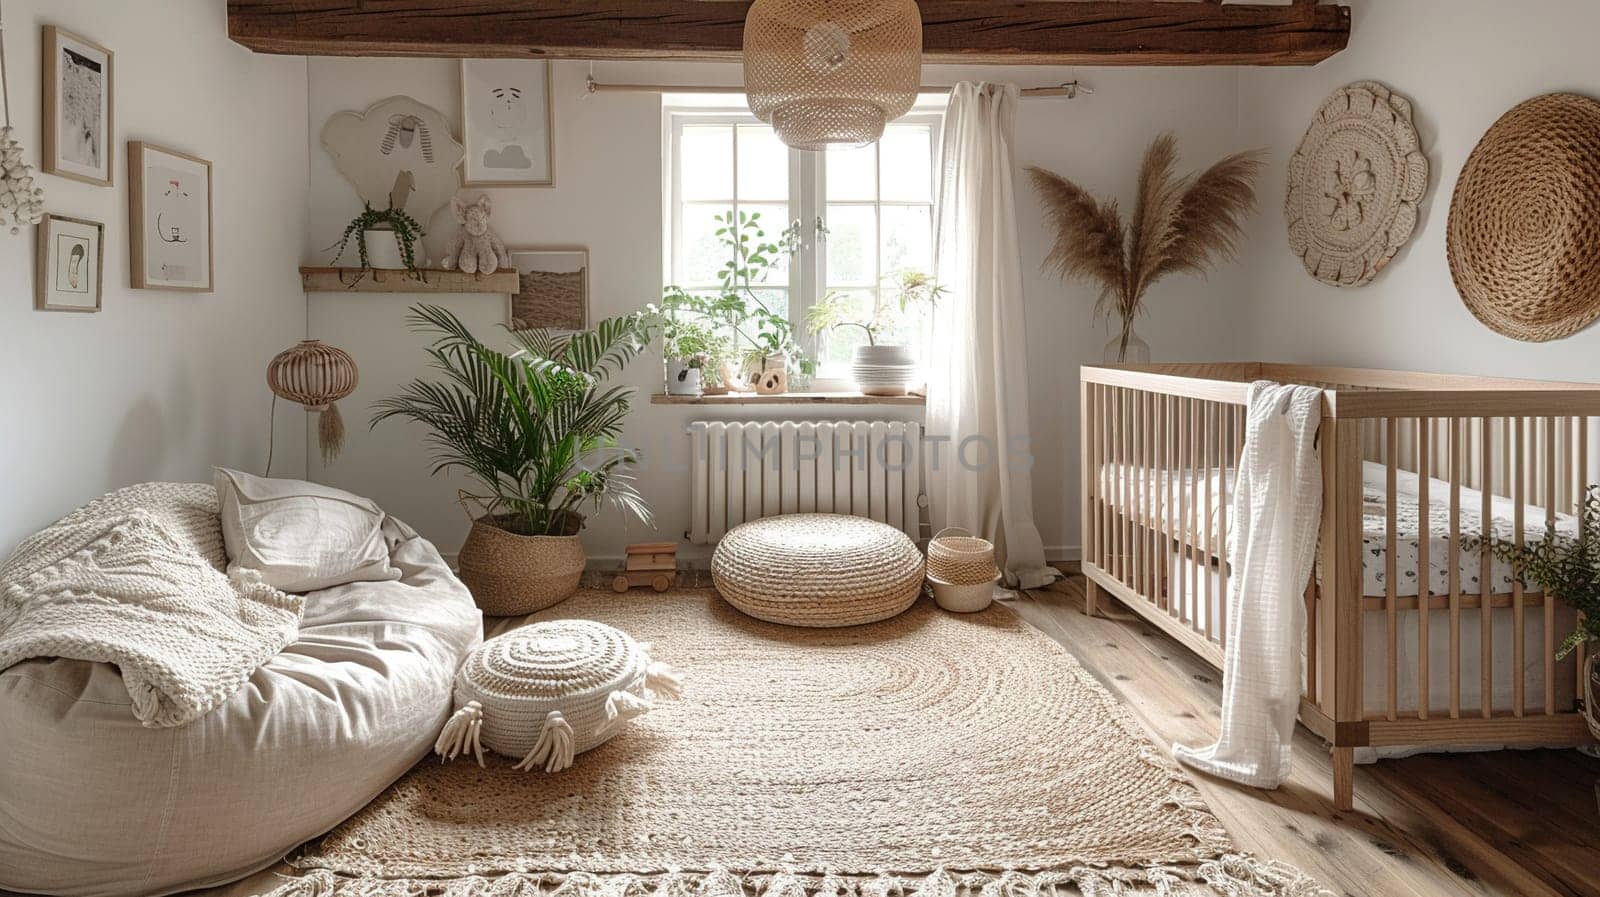 Minimalist Scandinavian nursery with natural wood, soft textiles, and muted colors.